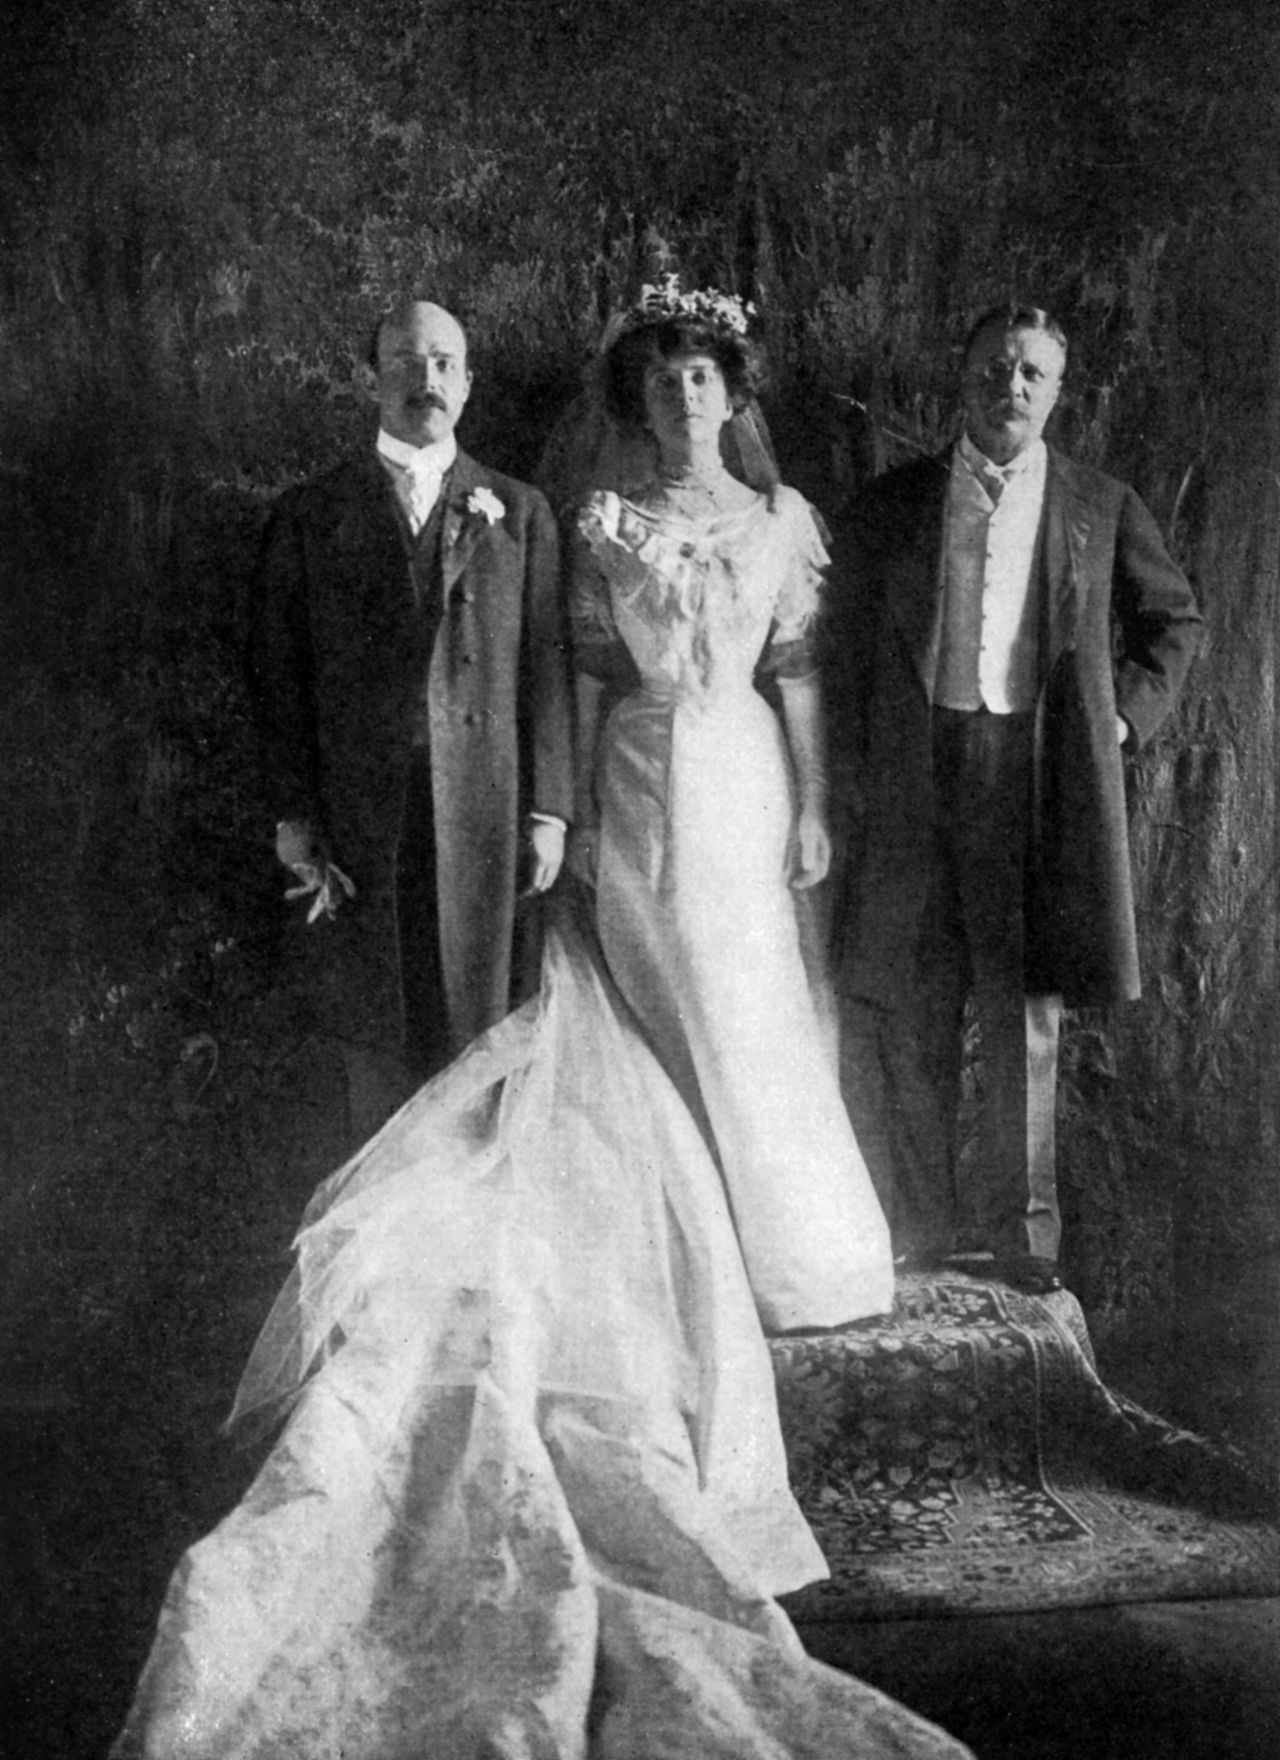 Alice Roosevelt and her husband, Nicholas Longworth, left, are joined by Alice's father, President Theodore Roosevelt, on their wedding day in 1906.